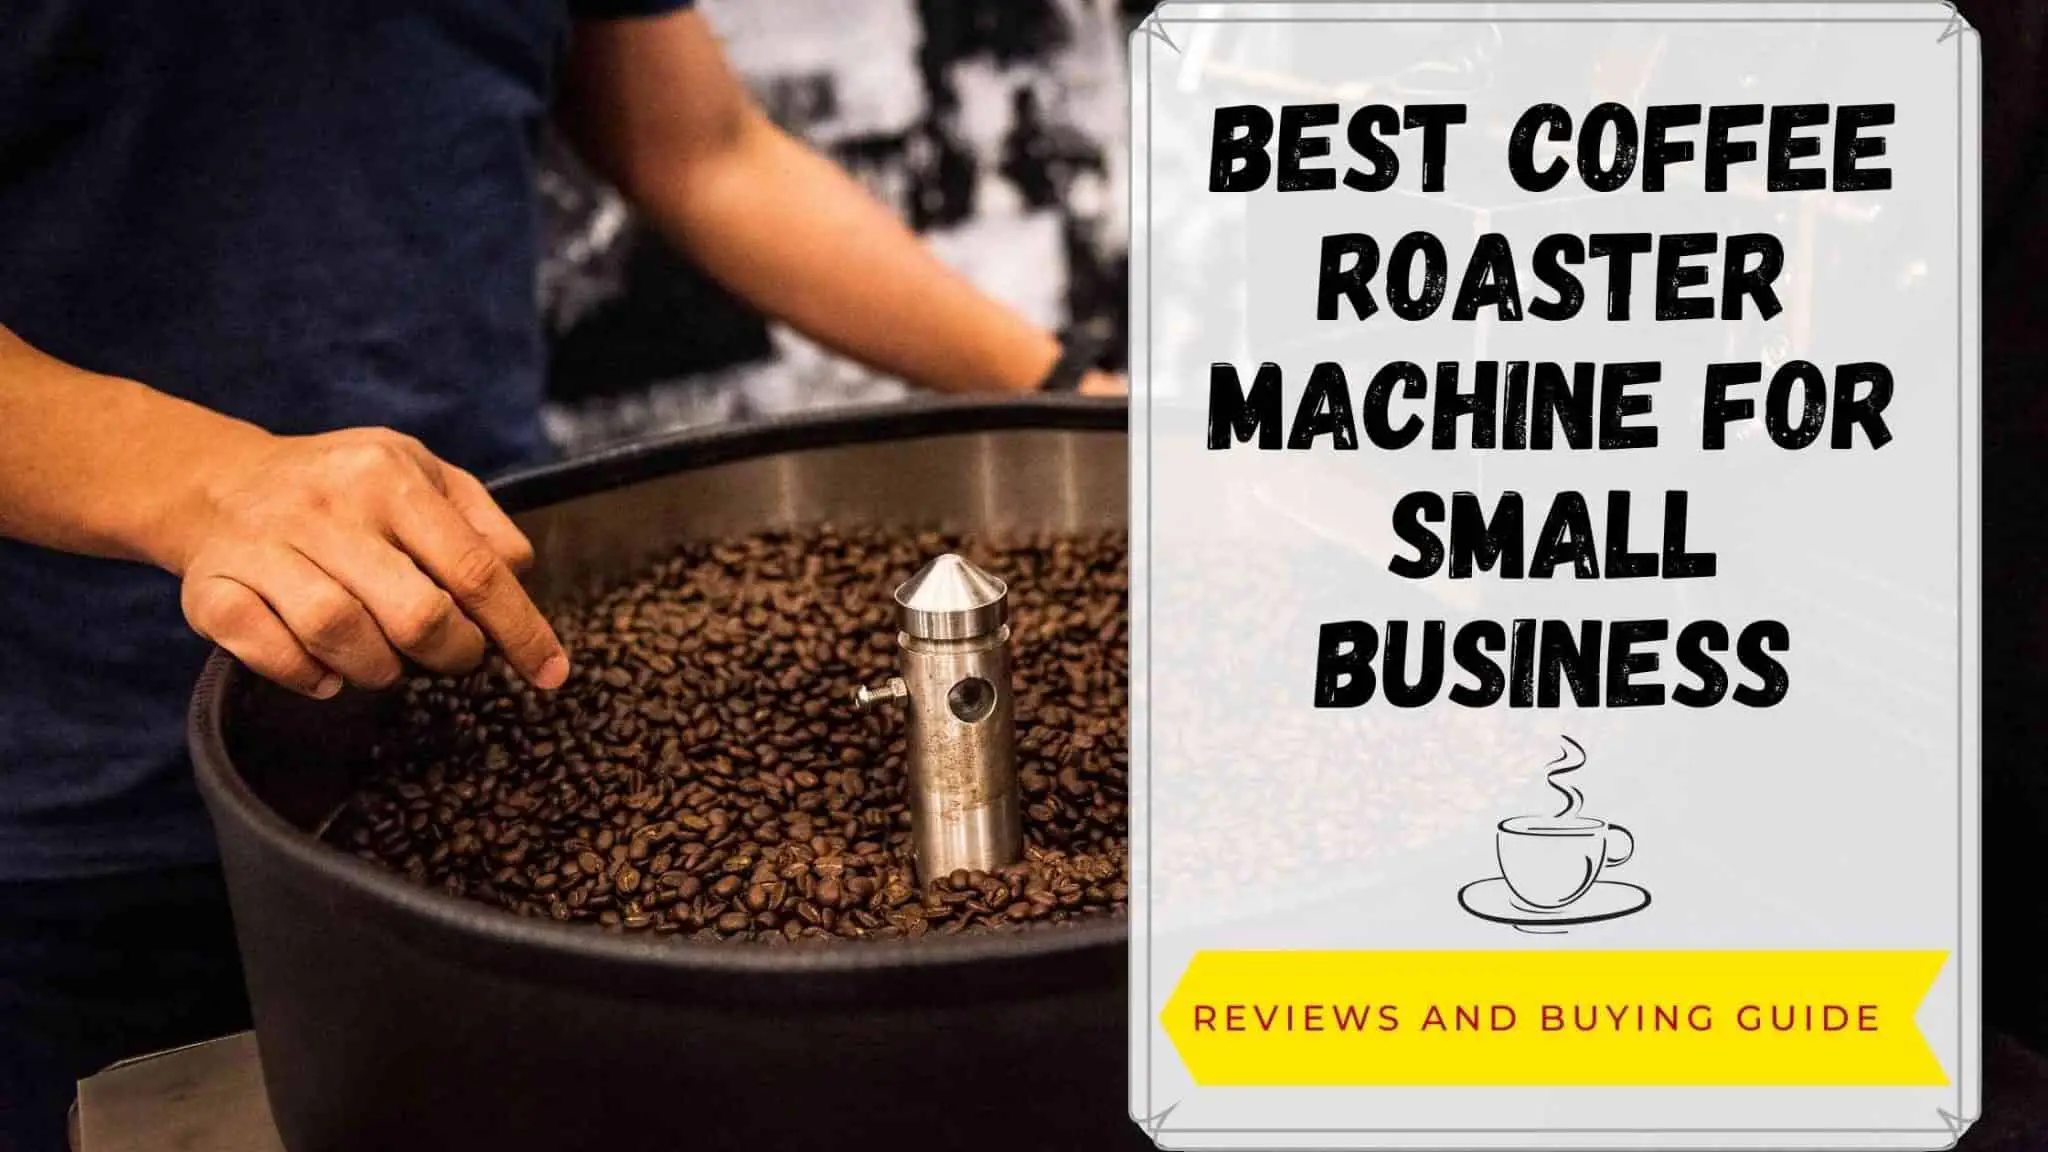 Top 17 Best Coffee Roaster Machine For Small Business That Will Surprise You